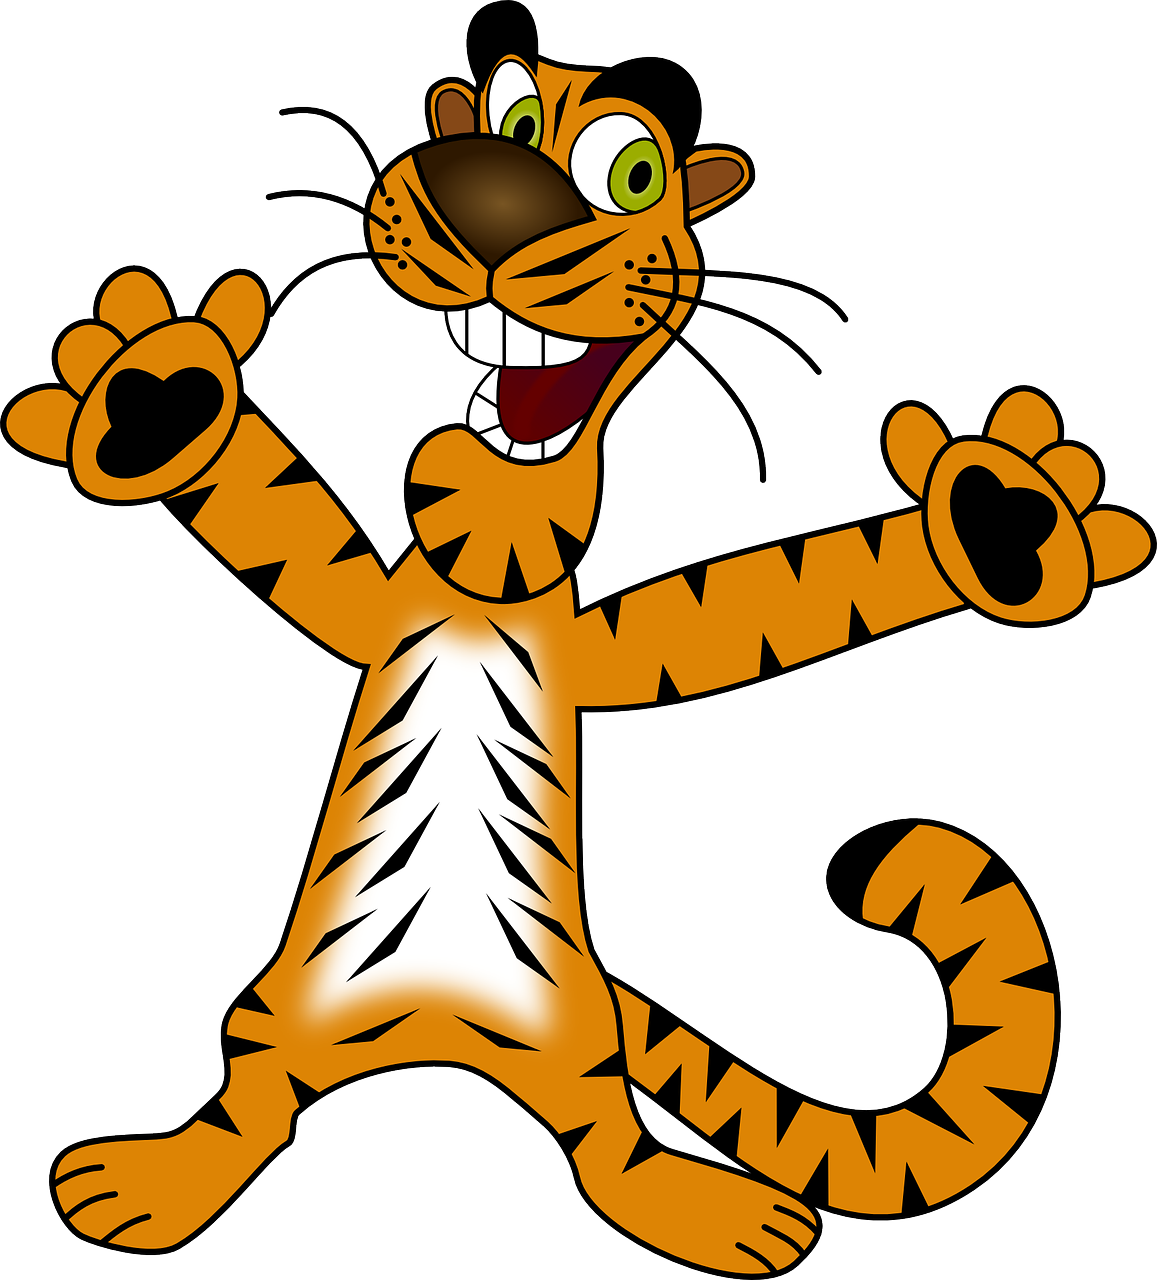 a cartoon tiger with his arms in the air, a digital rendering, inspired by Hanna-Barbera, flickr, cobra, goofy smile, dark!!!, bangalore, clip art